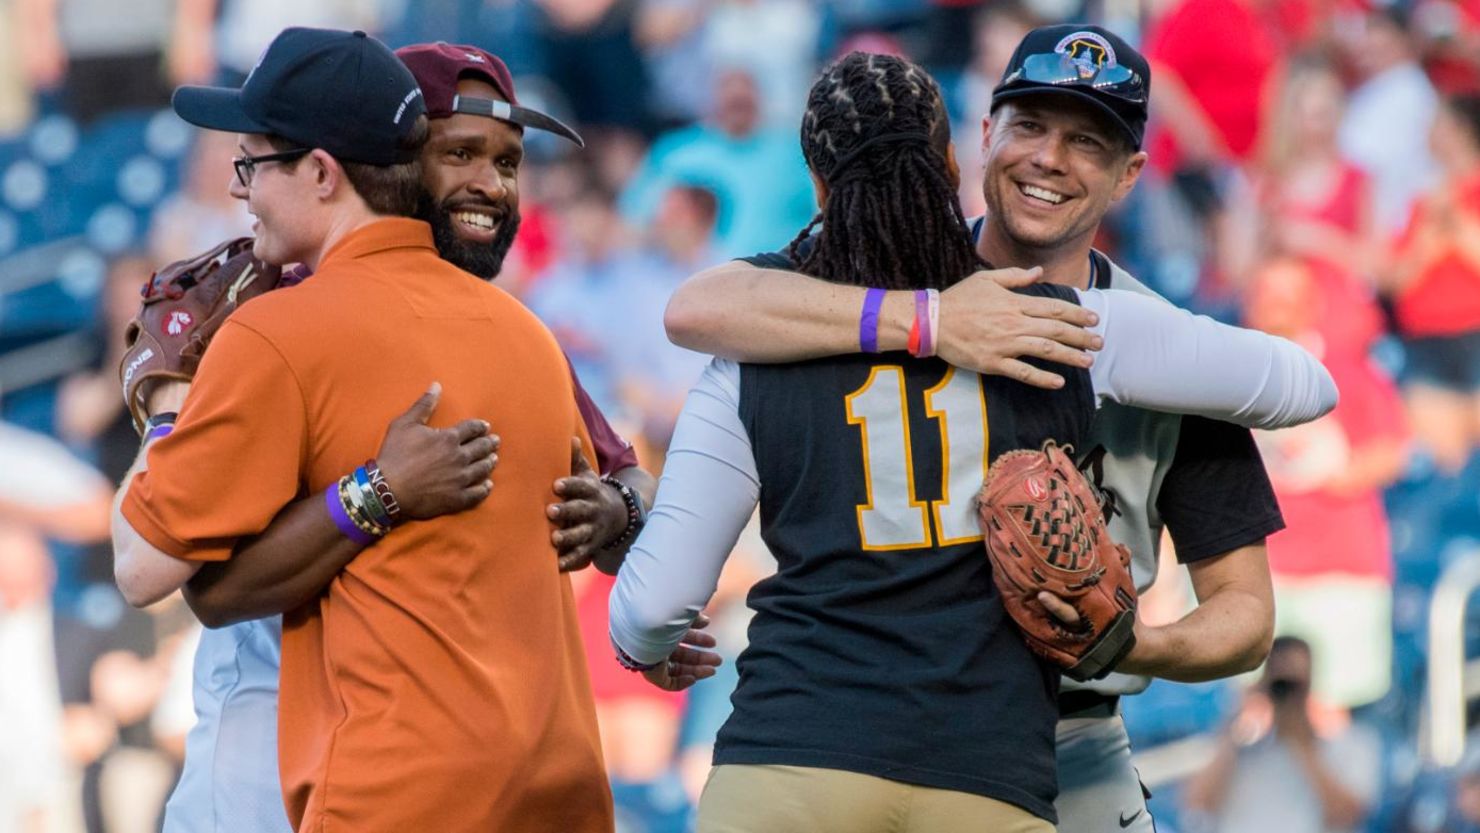 Matt Mika, far right, and Zack Barth, orange shirt, who were wounded in the GOP baseball practice shooting last year, hug US Capitol Police Special Agents David Bailey and Crystal Griner, during the 57th annual Congressional Baseball Game at Nationals Park on June 14, 2018. Bailey and Griner helped neutralize the shooter in 2017. (Photo By Tom Williams/CQ Roll Call)